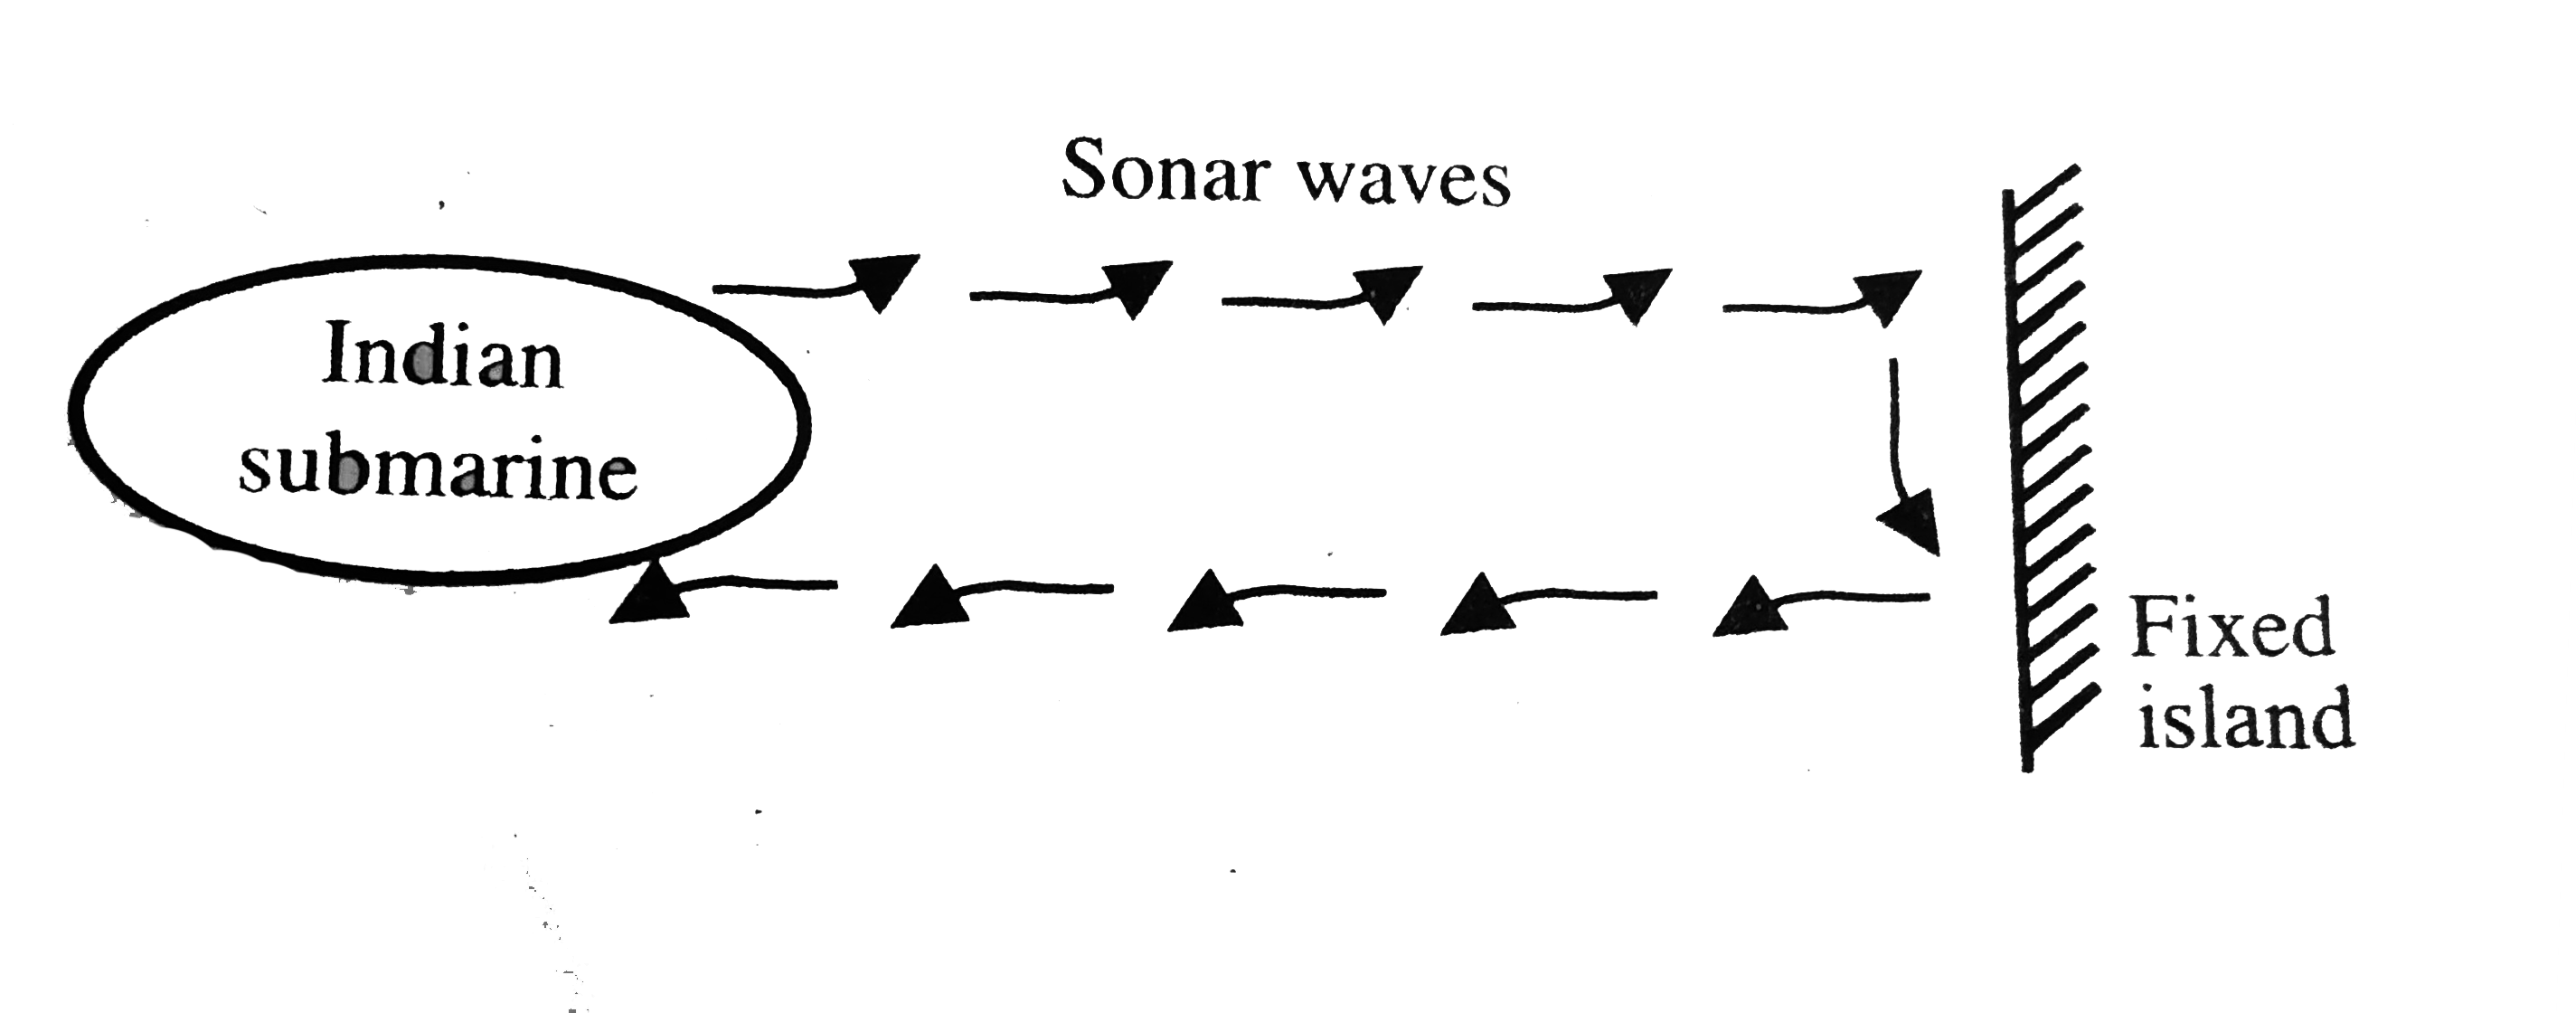 An indian submarine is moving in the Arabian sea with constant velocity. To detect enemy it sends out sonar waves which travel with velocity 1050(m)/(s) in water. Initially the waves are getting reflected from a fixed island and the reflected waves are coming back to submarine. The frequency of reflected waves are detected by the submarine and found to be 10% greater than the sent waves.   Now an enemy ship comes in front, due to which the frequency of reflected waves detected by submarine becomes 21% greater than the sent waves.   Q. The velocity of enemy ship should be